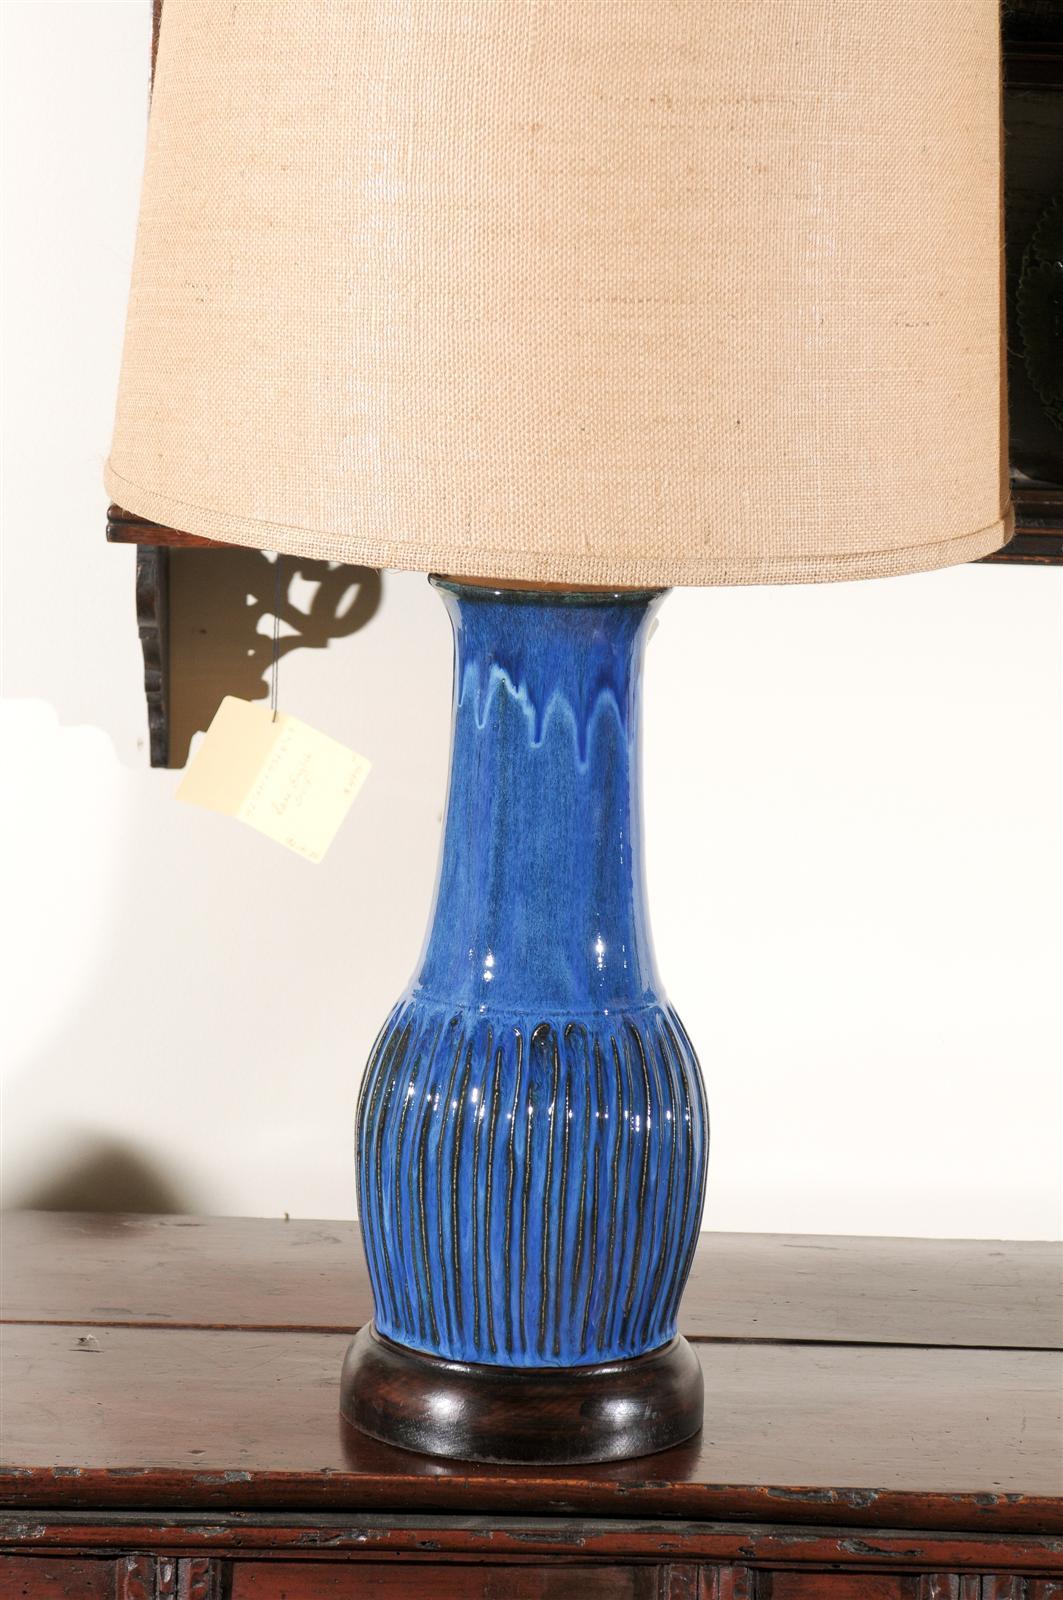 Contemporary Original Hand-Turned Lamps by a Local Georgia Potter